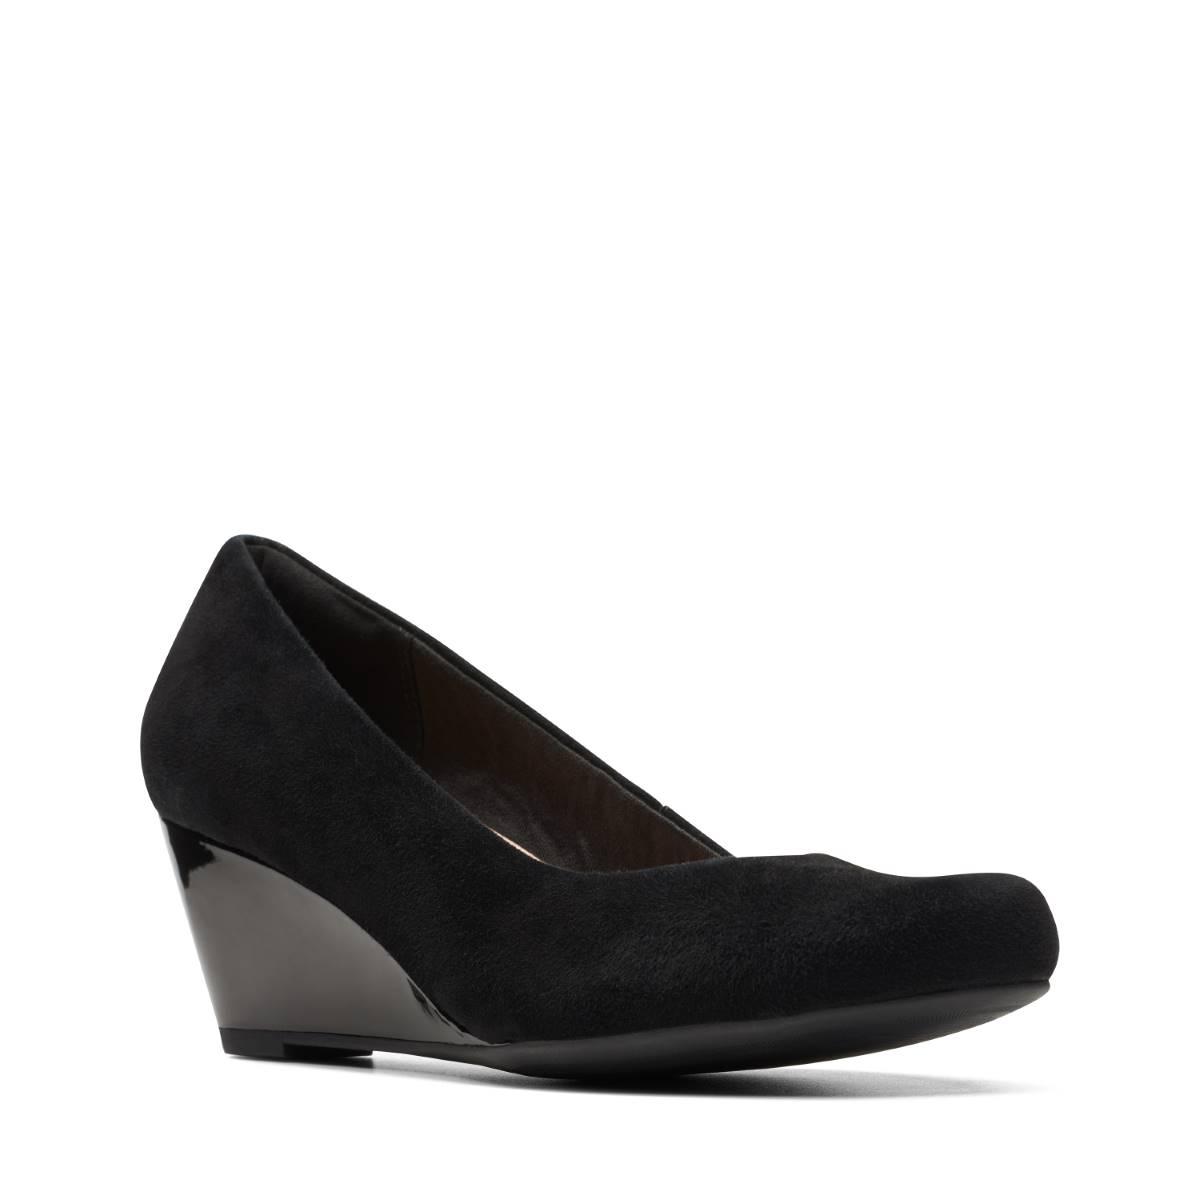 Clarks Flores Tulip Black suede Womens Wedge Shoes 7515-44D in a Plain Leather in Size 4.5